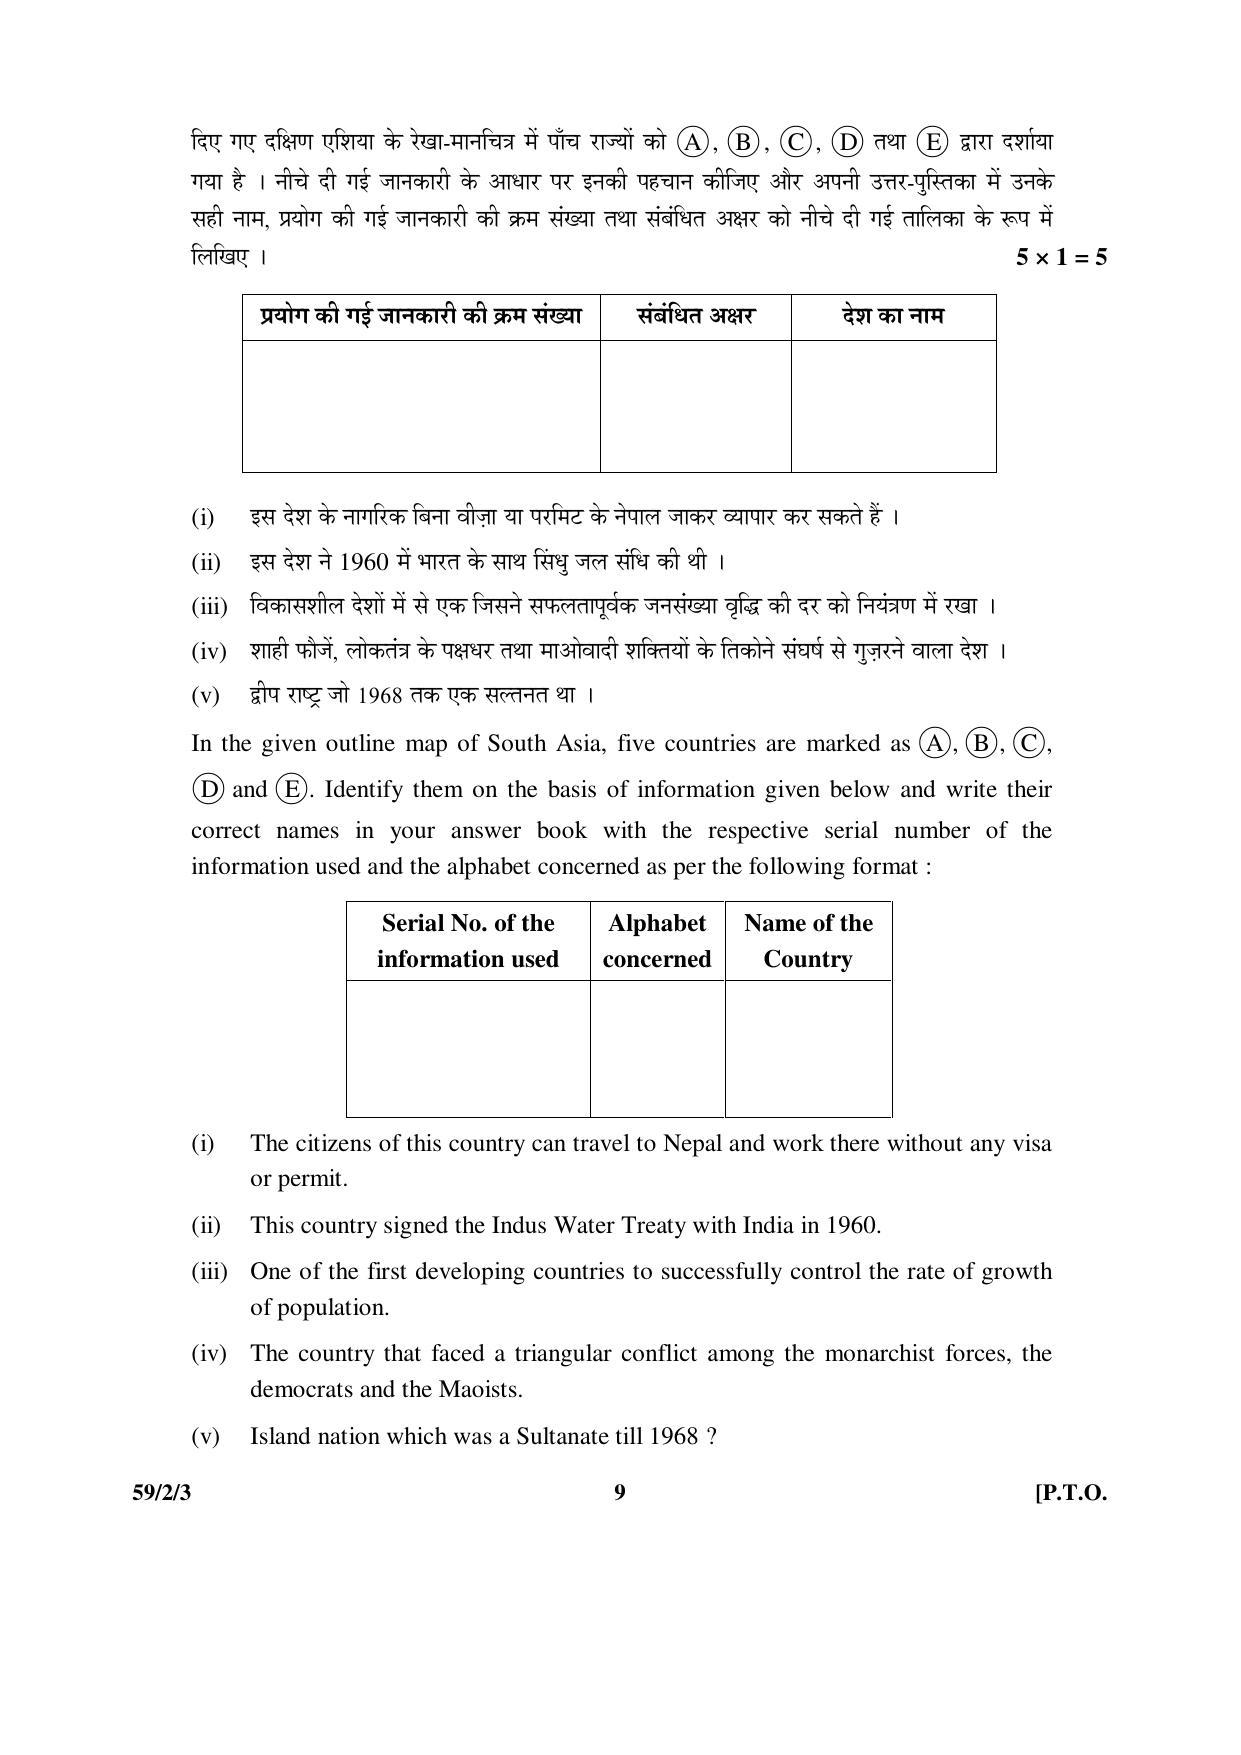 CBSE Class 12 59-2-3 _Political Science 2016 Question Paper - Page 9